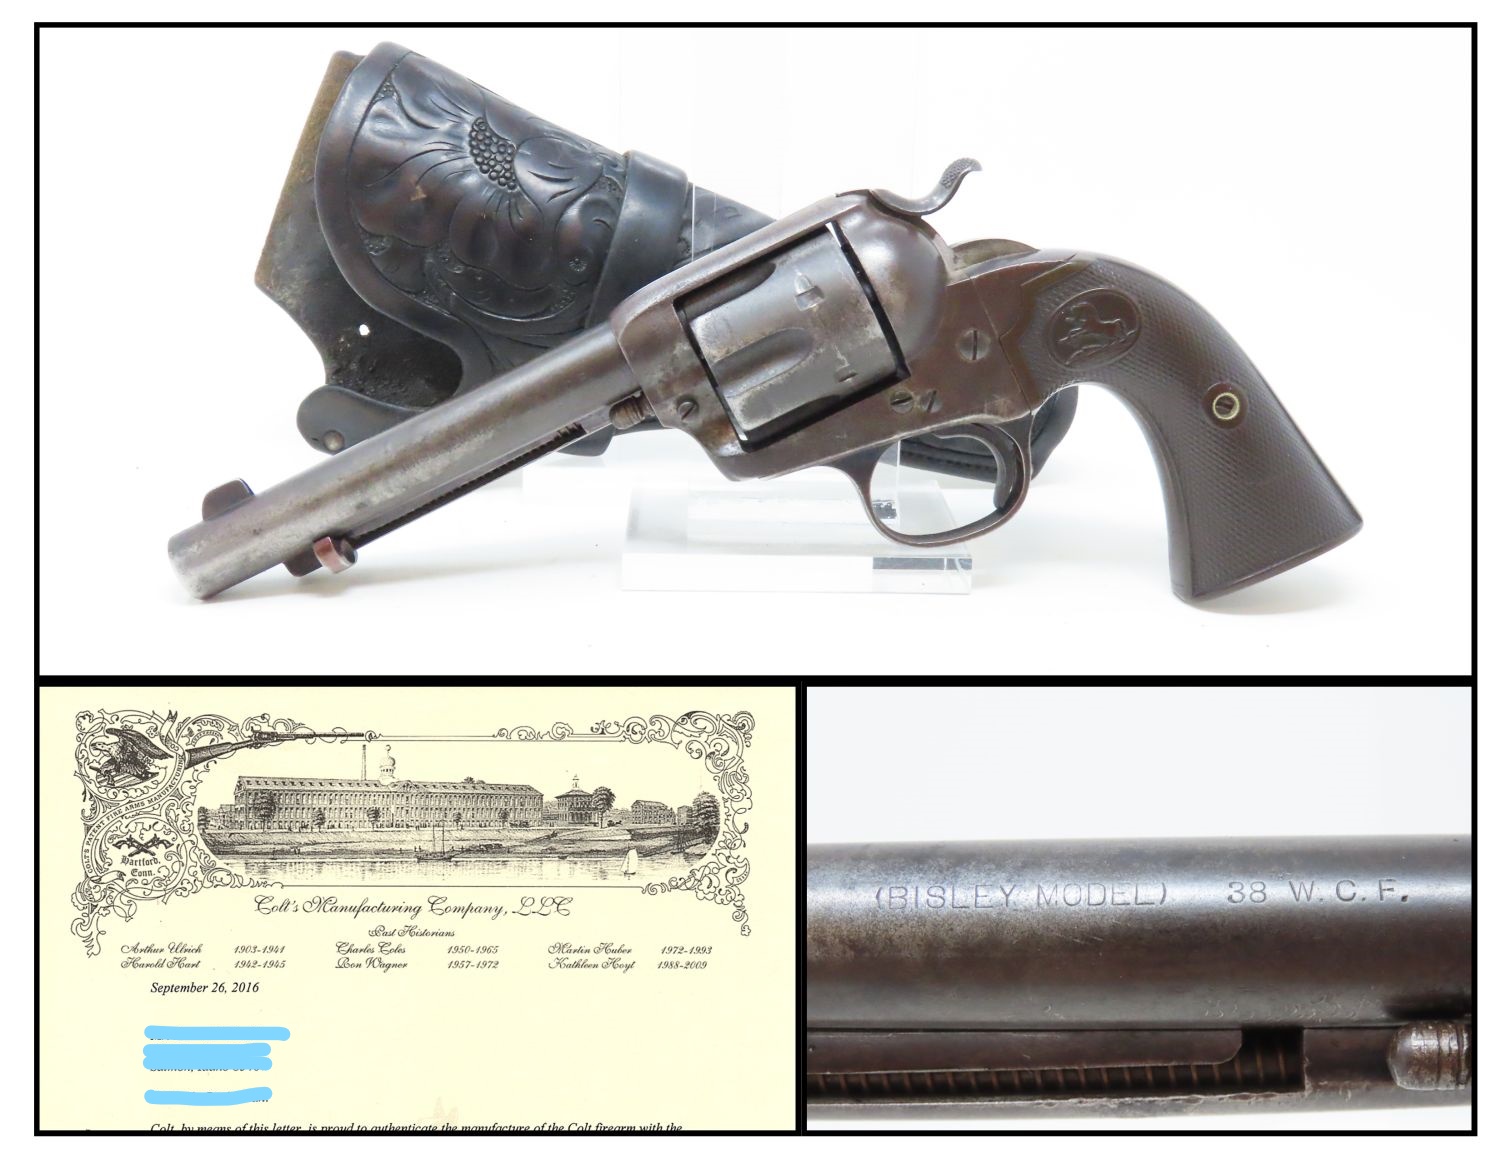 1 Texas Shipped Colt First Generation Bisley Single Action Army Revolver Ancestry Guns